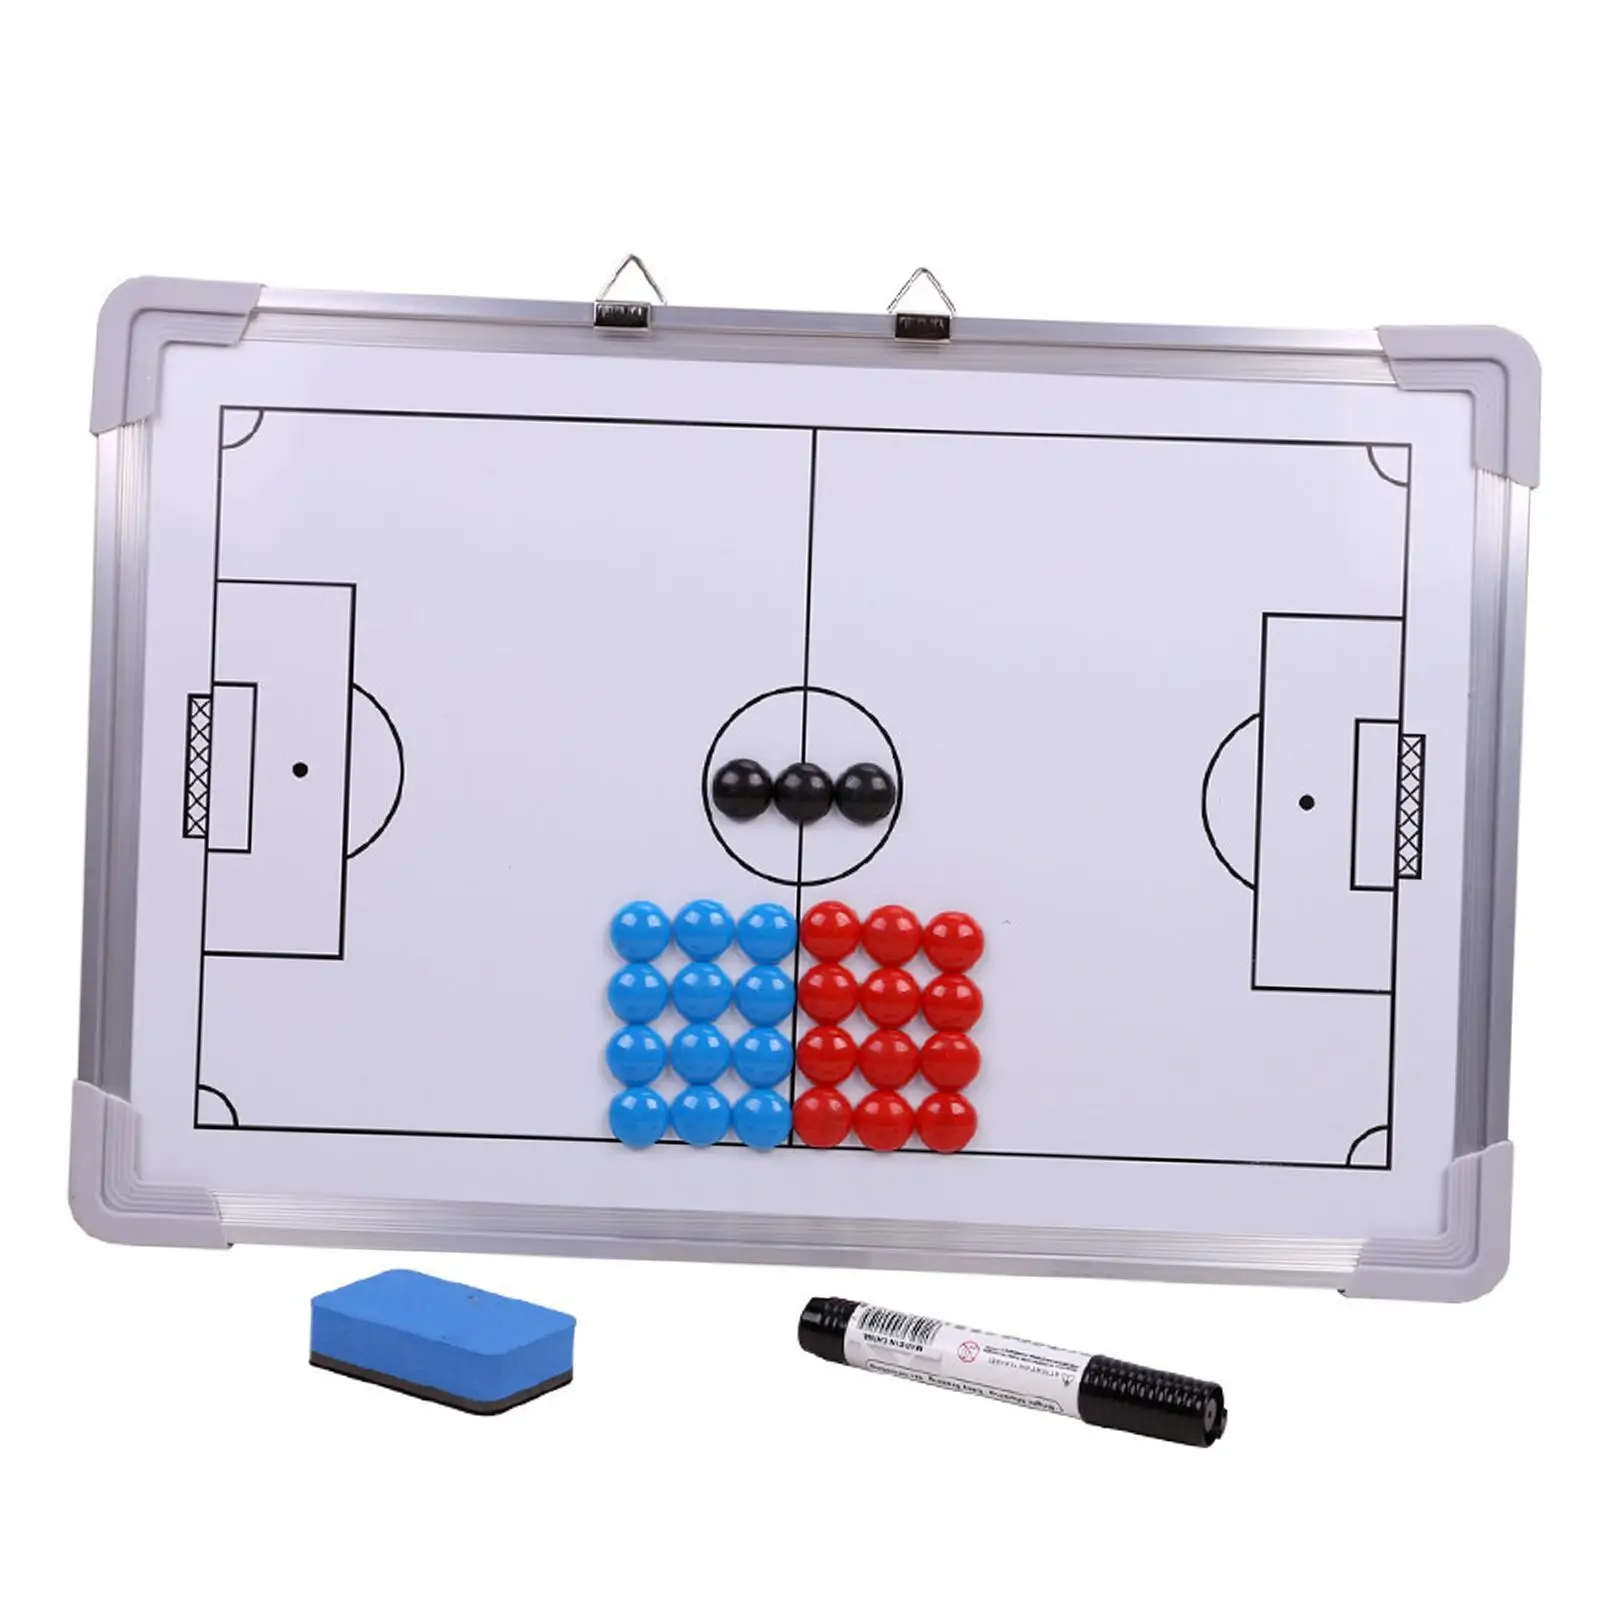 Aluminum Alloy Soccer   with 27 Buttons Easy to Hang Whiteboard